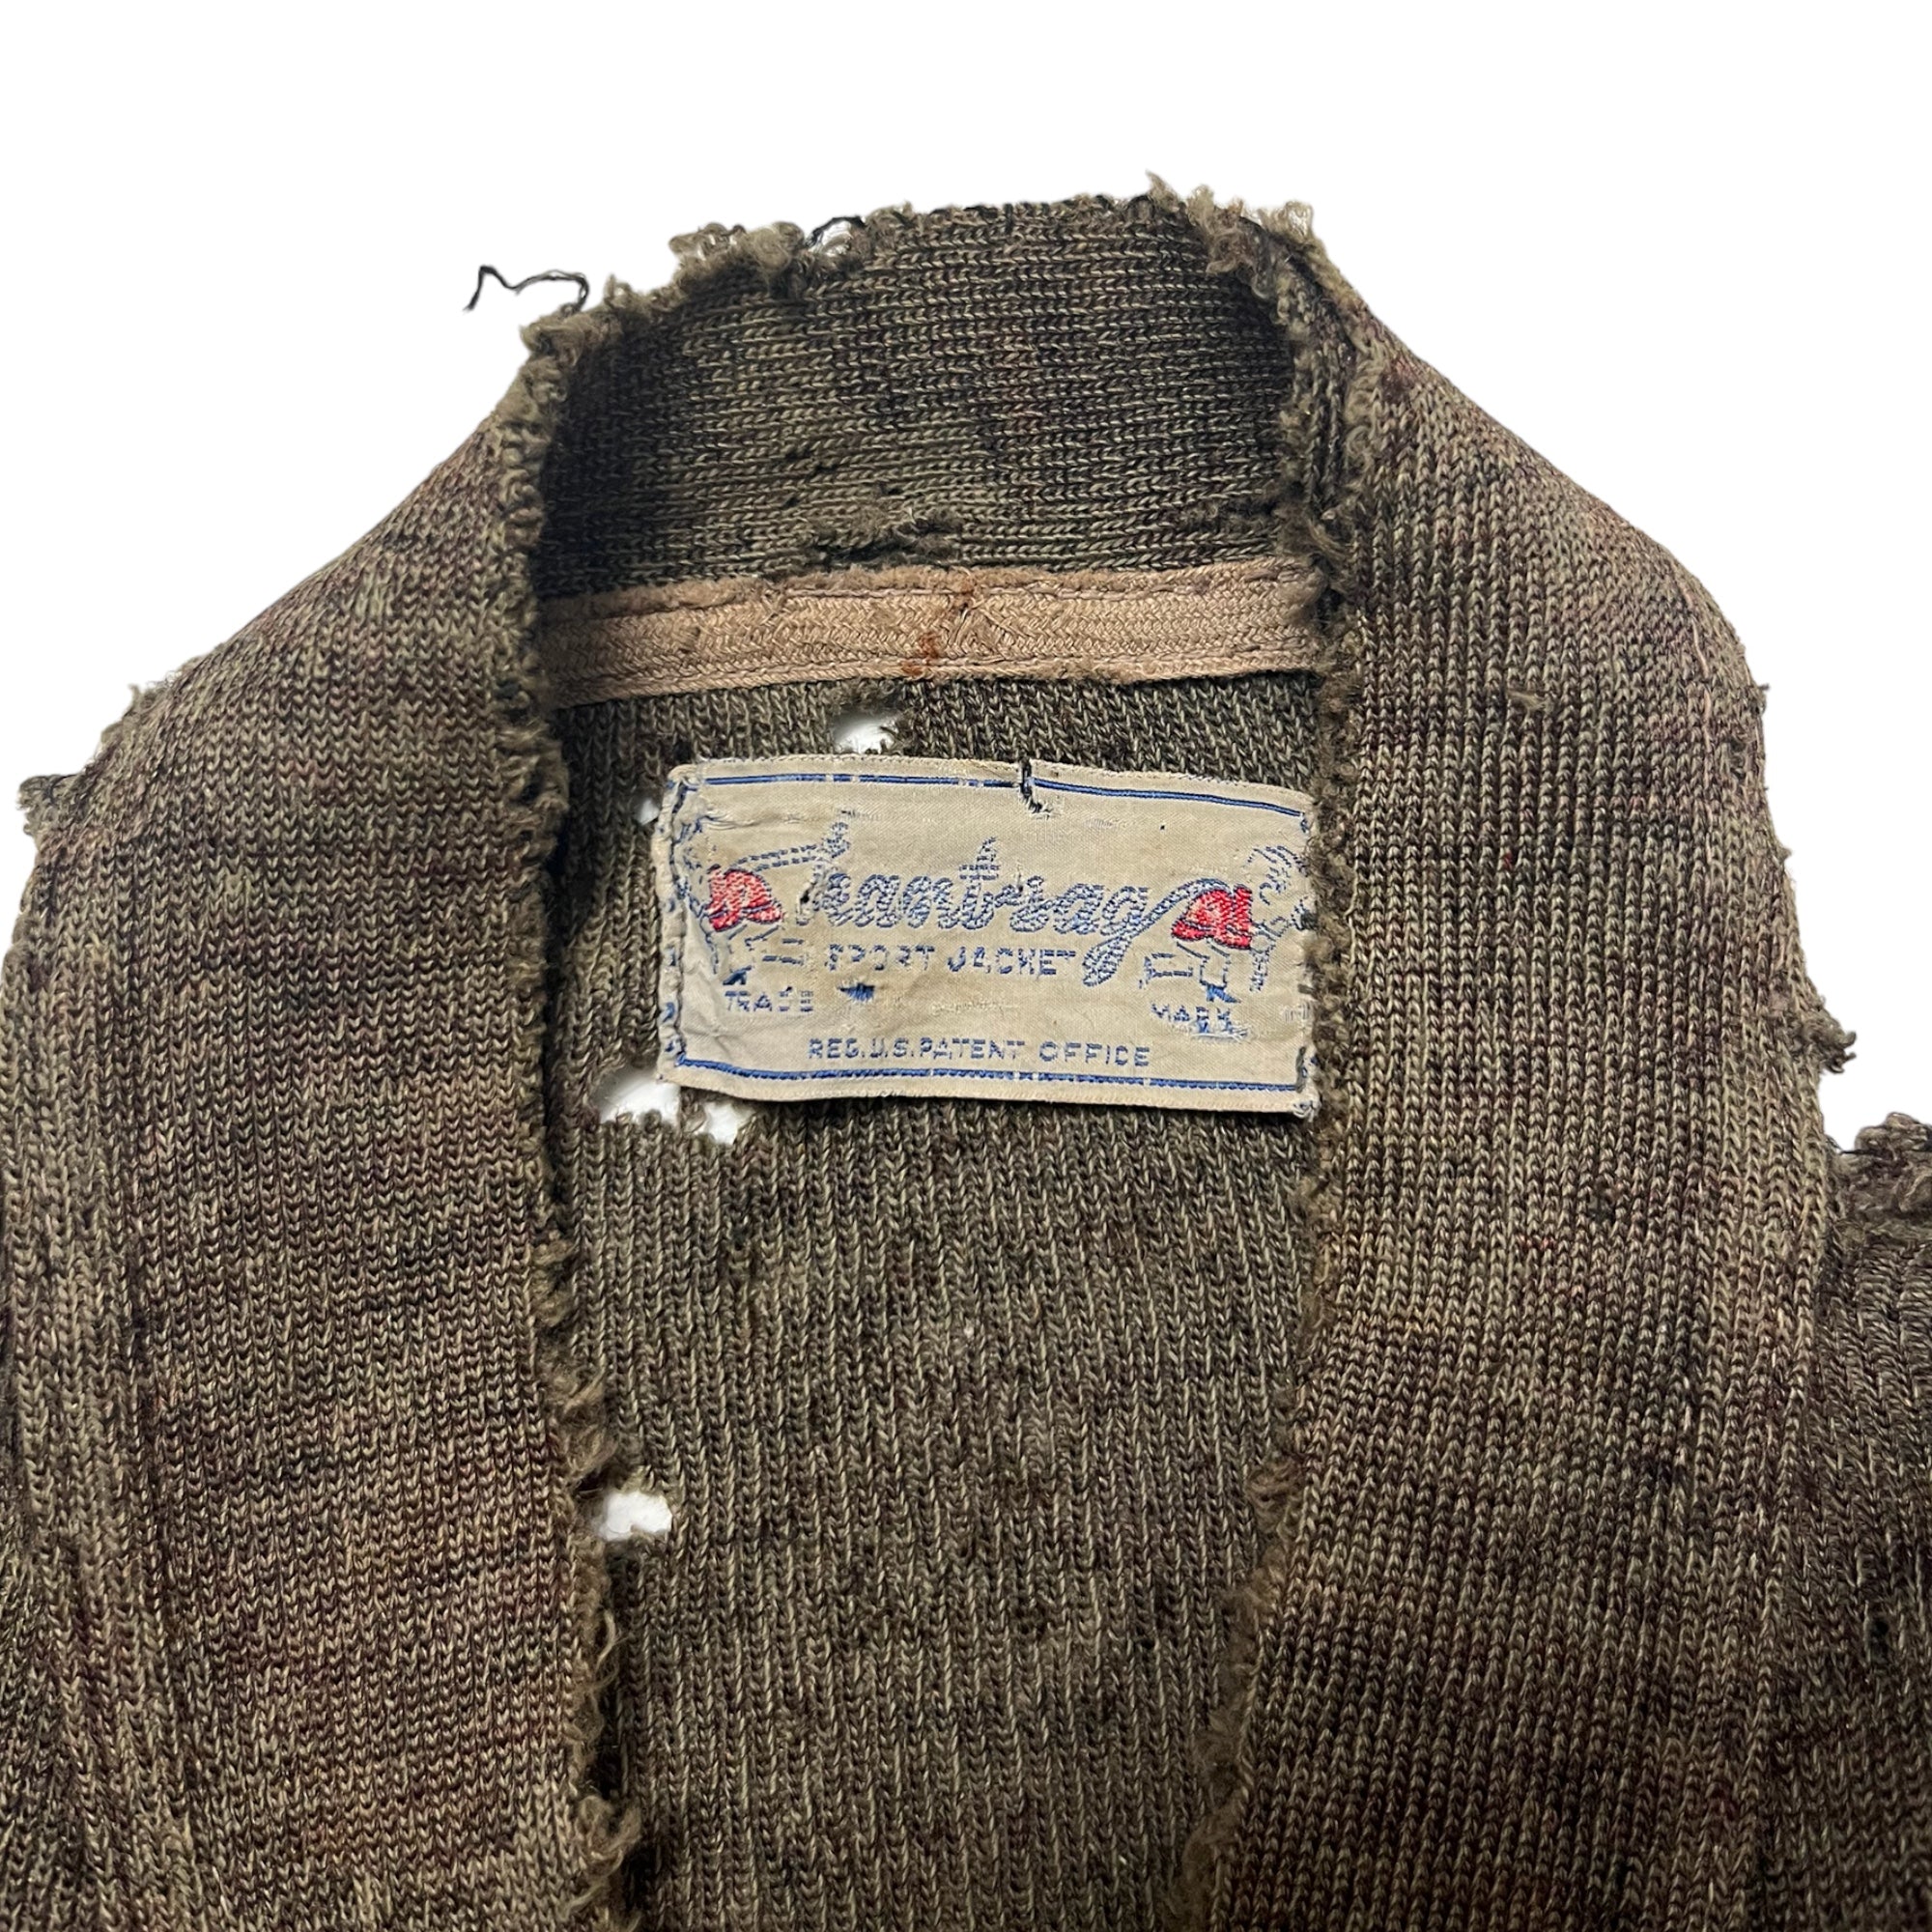 1940s/50s Severely Thrashed Cardigan - Brown/Drab - S/M